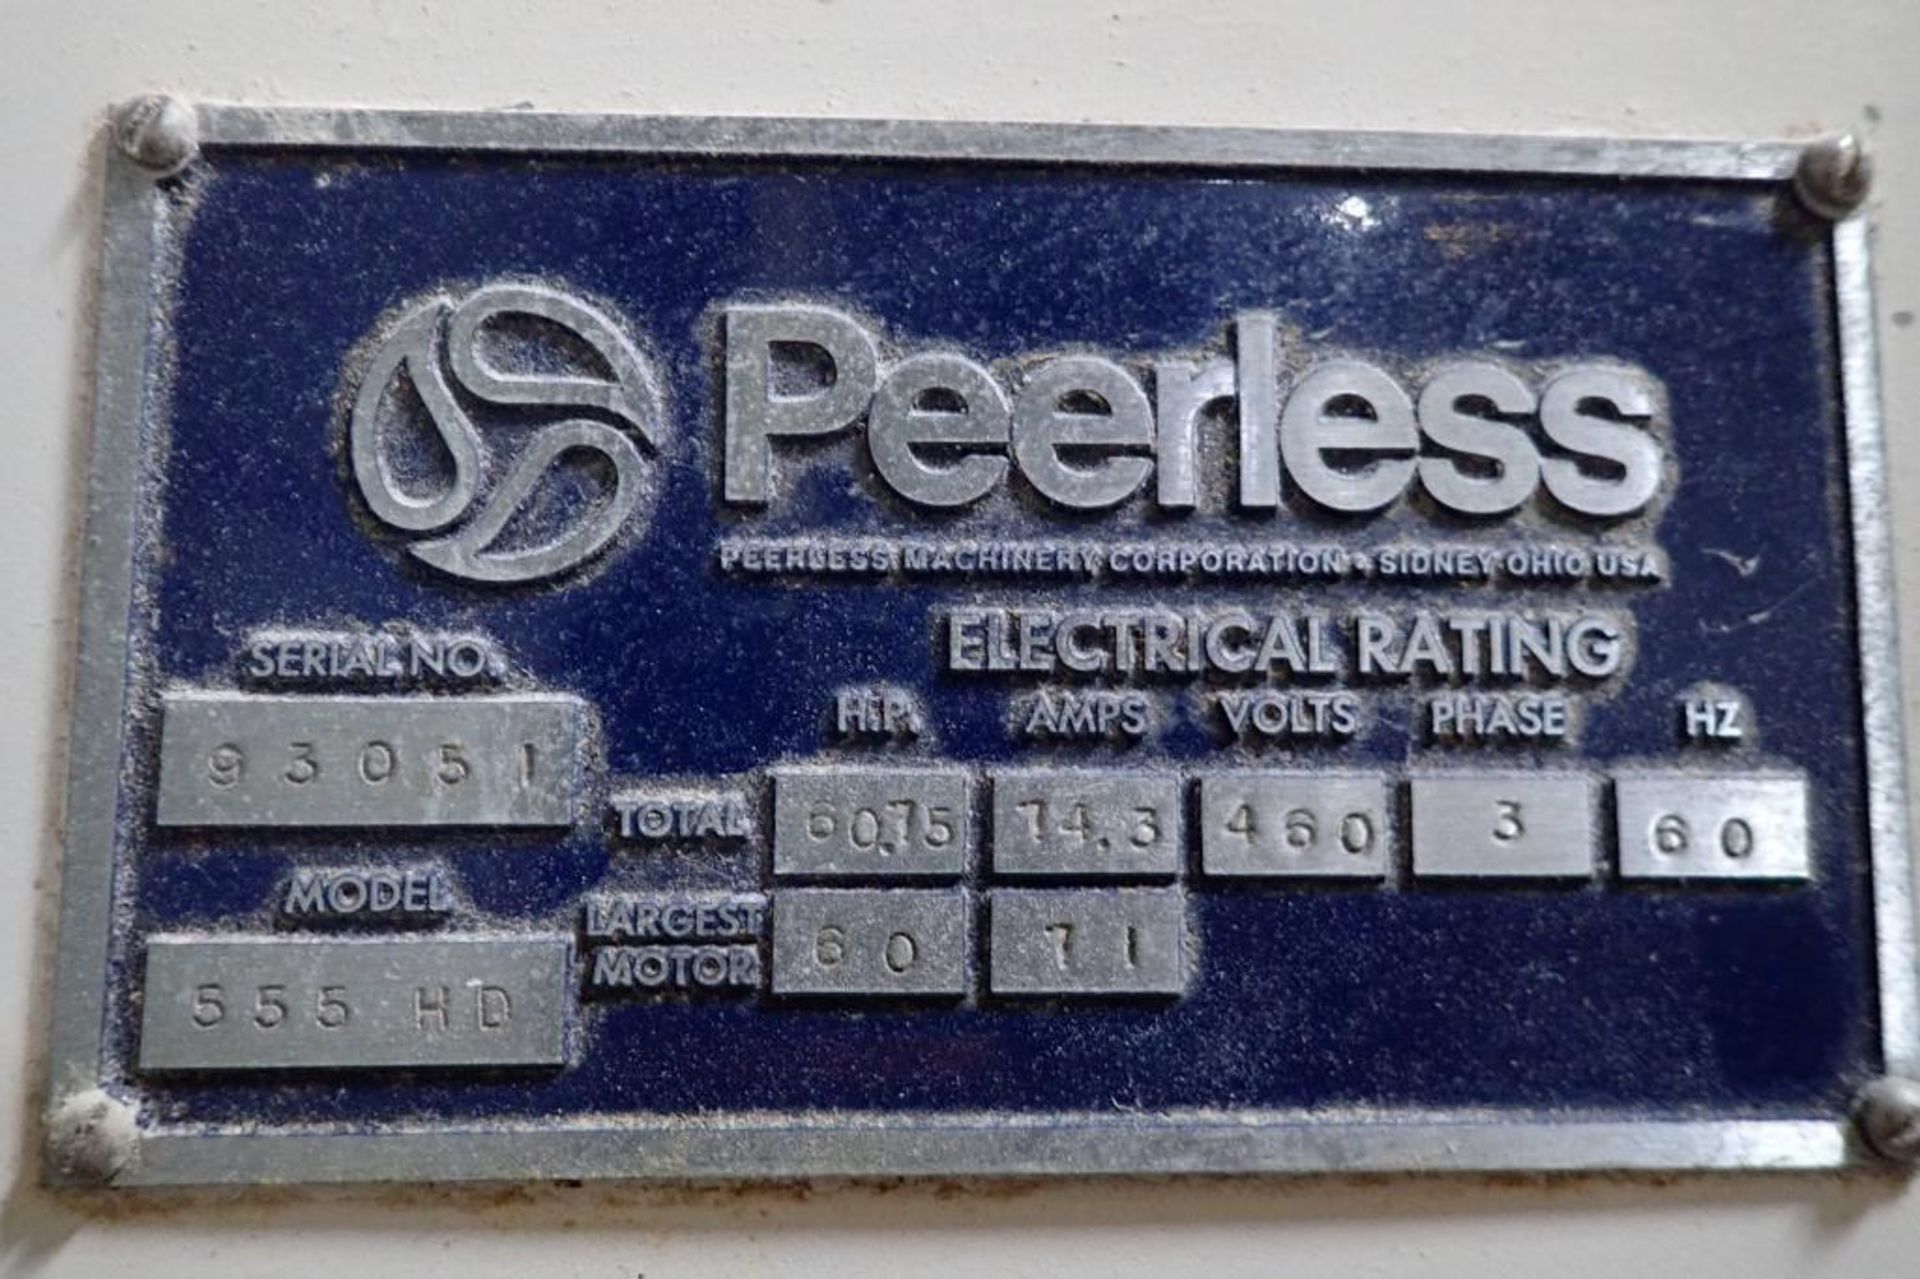 Peerless SS roller bar mixer, Model 555HD, SN 93051, 42 in. bowl, jacketed. **Rigging Fee: $1500** - Image 16 of 18